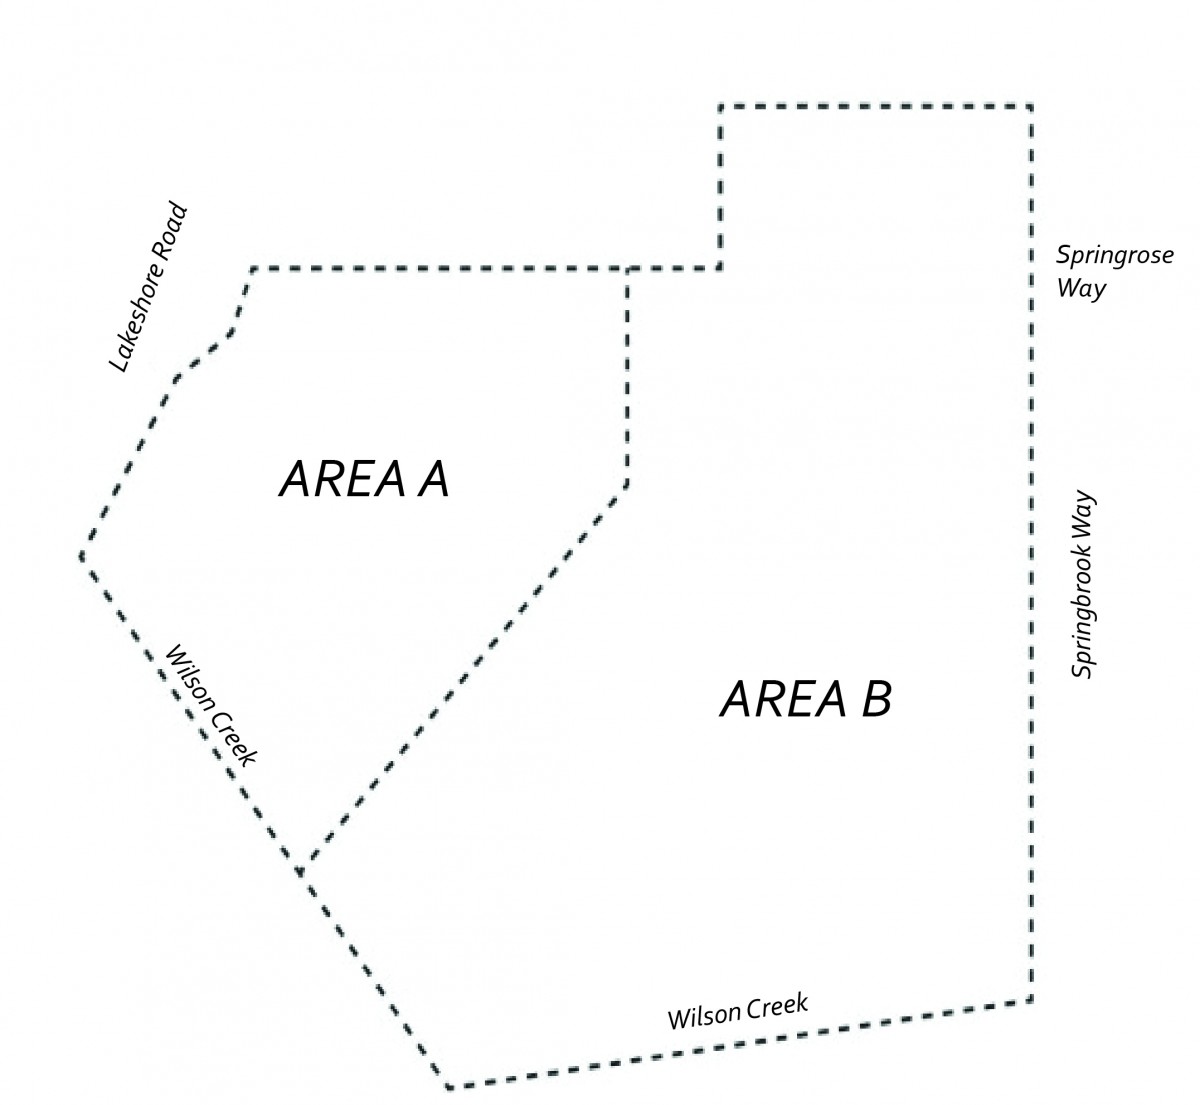 2040 OCP - Comprehensive Zone 24, image of Area A and B